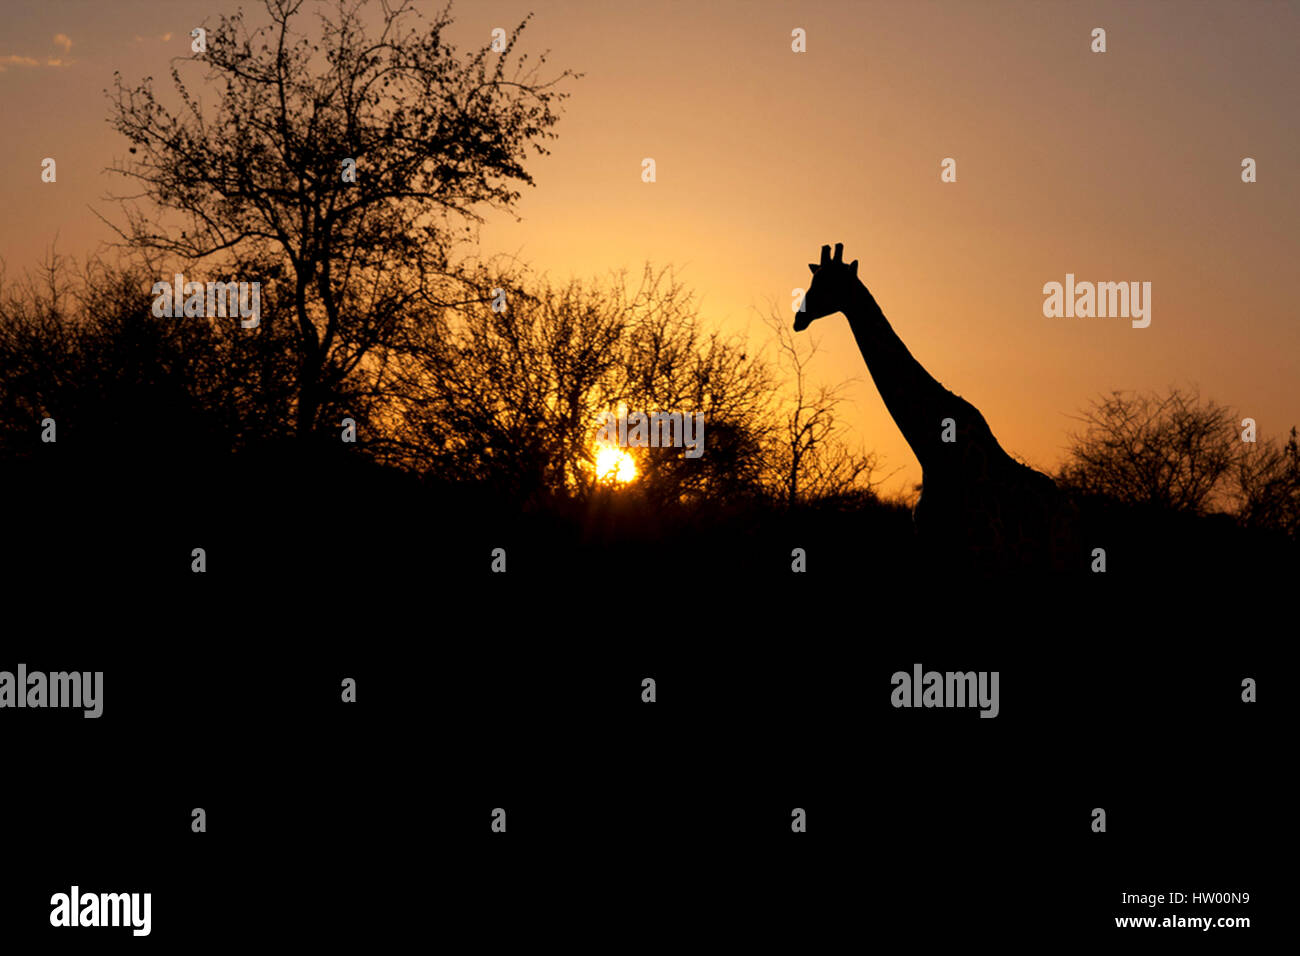 A Giraffe is silhouetted in an African Sunset Stock Photo